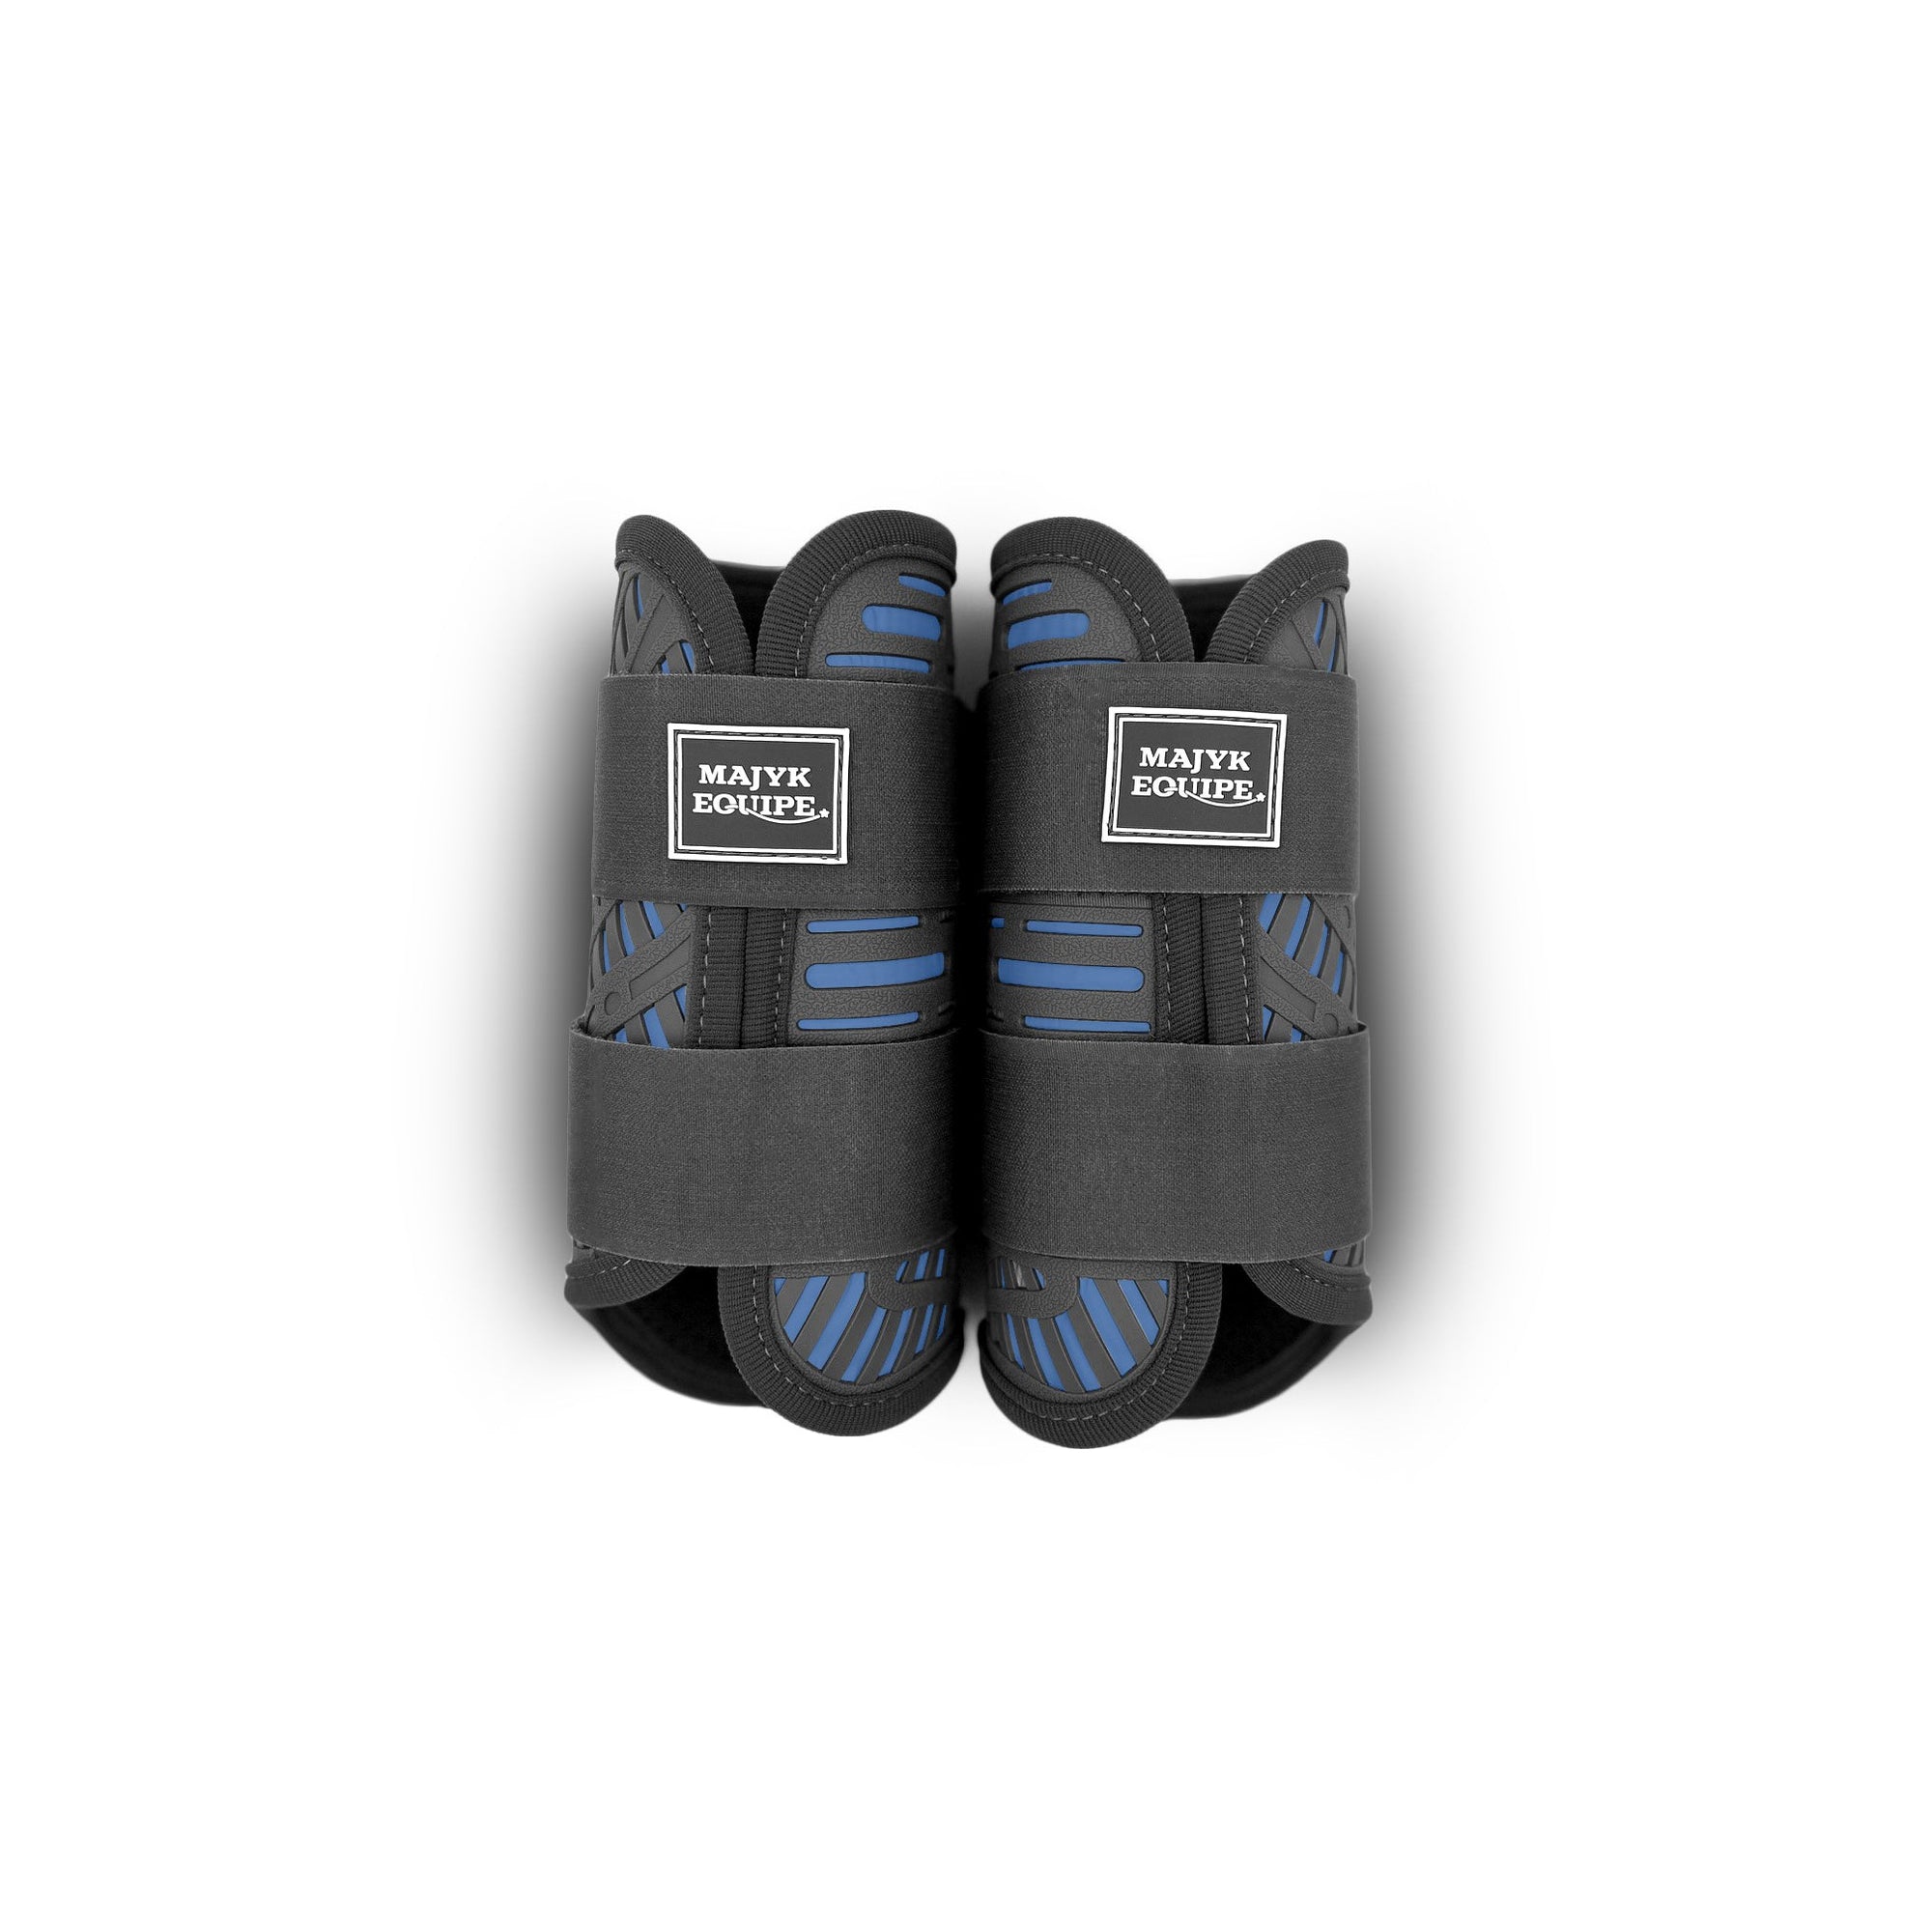 MAJYK EQUIPE 4 PACK GREY/SUEDE BLUE - Majyk Equipe